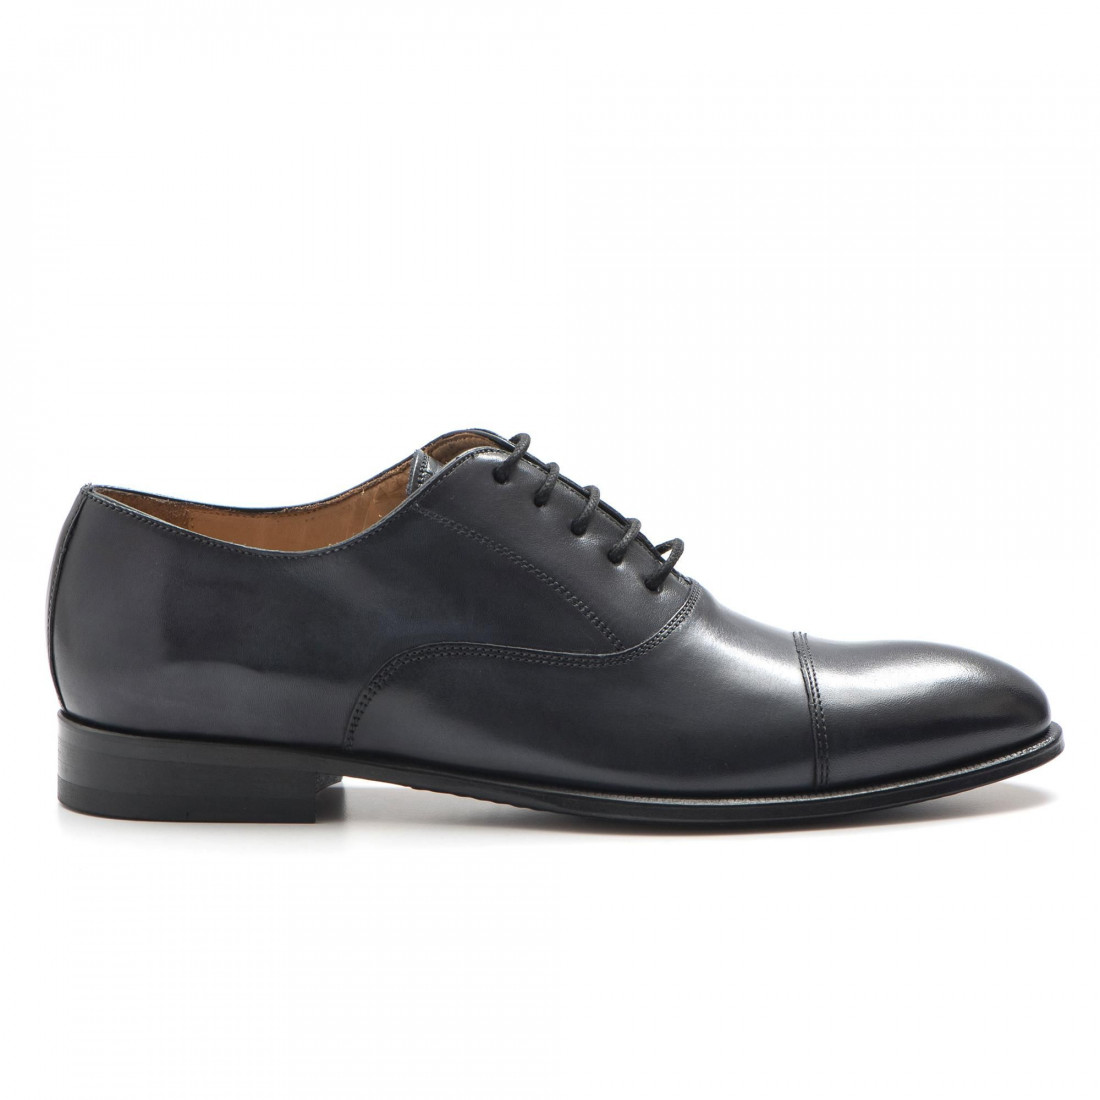 Brecos men's oxford shoes in soft blue leather